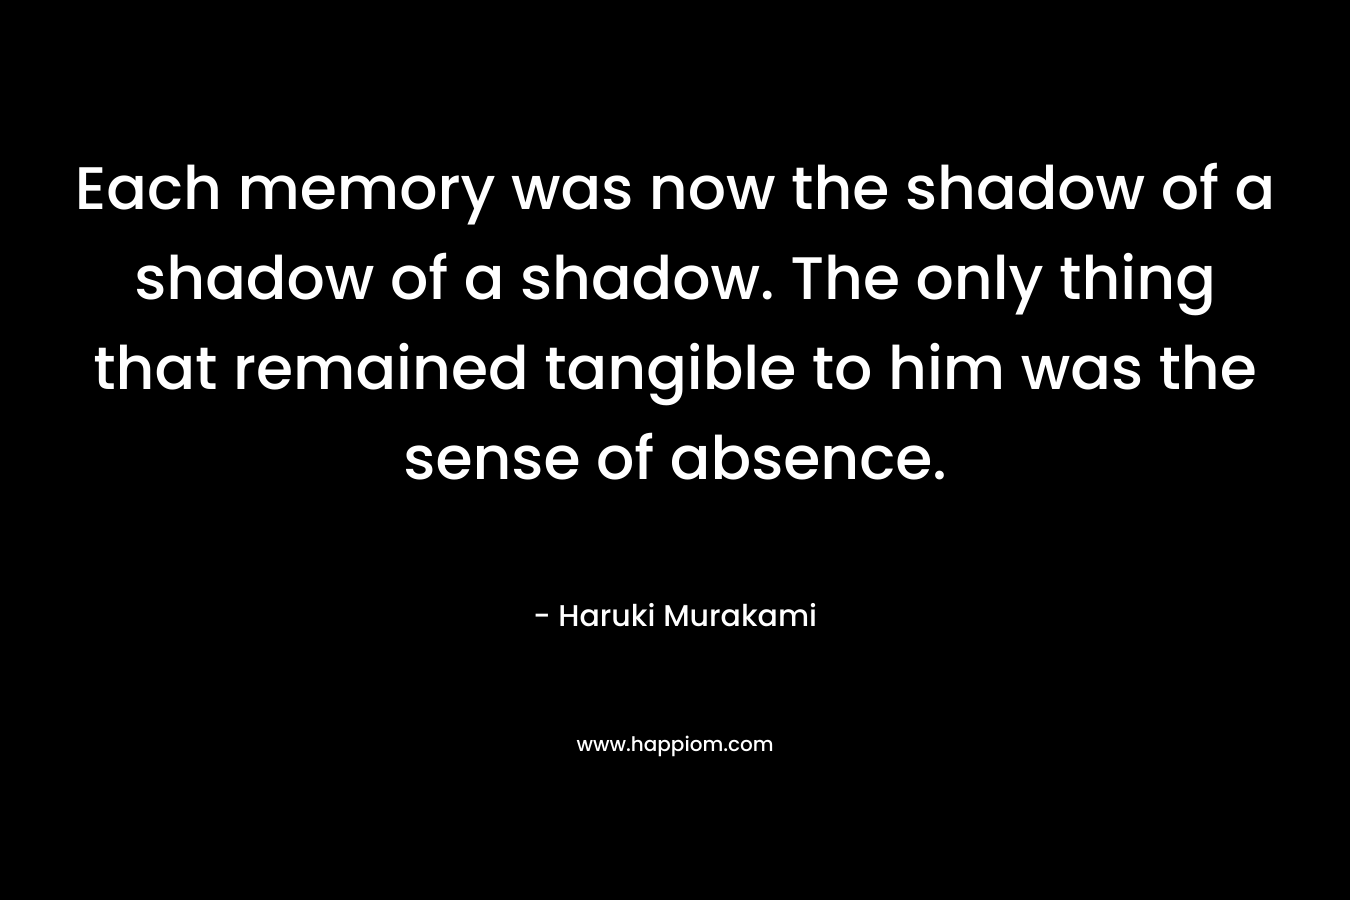 Each memory was now the shadow of a shadow of a shadow. The only thing that remained tangible to him was the sense of absence.